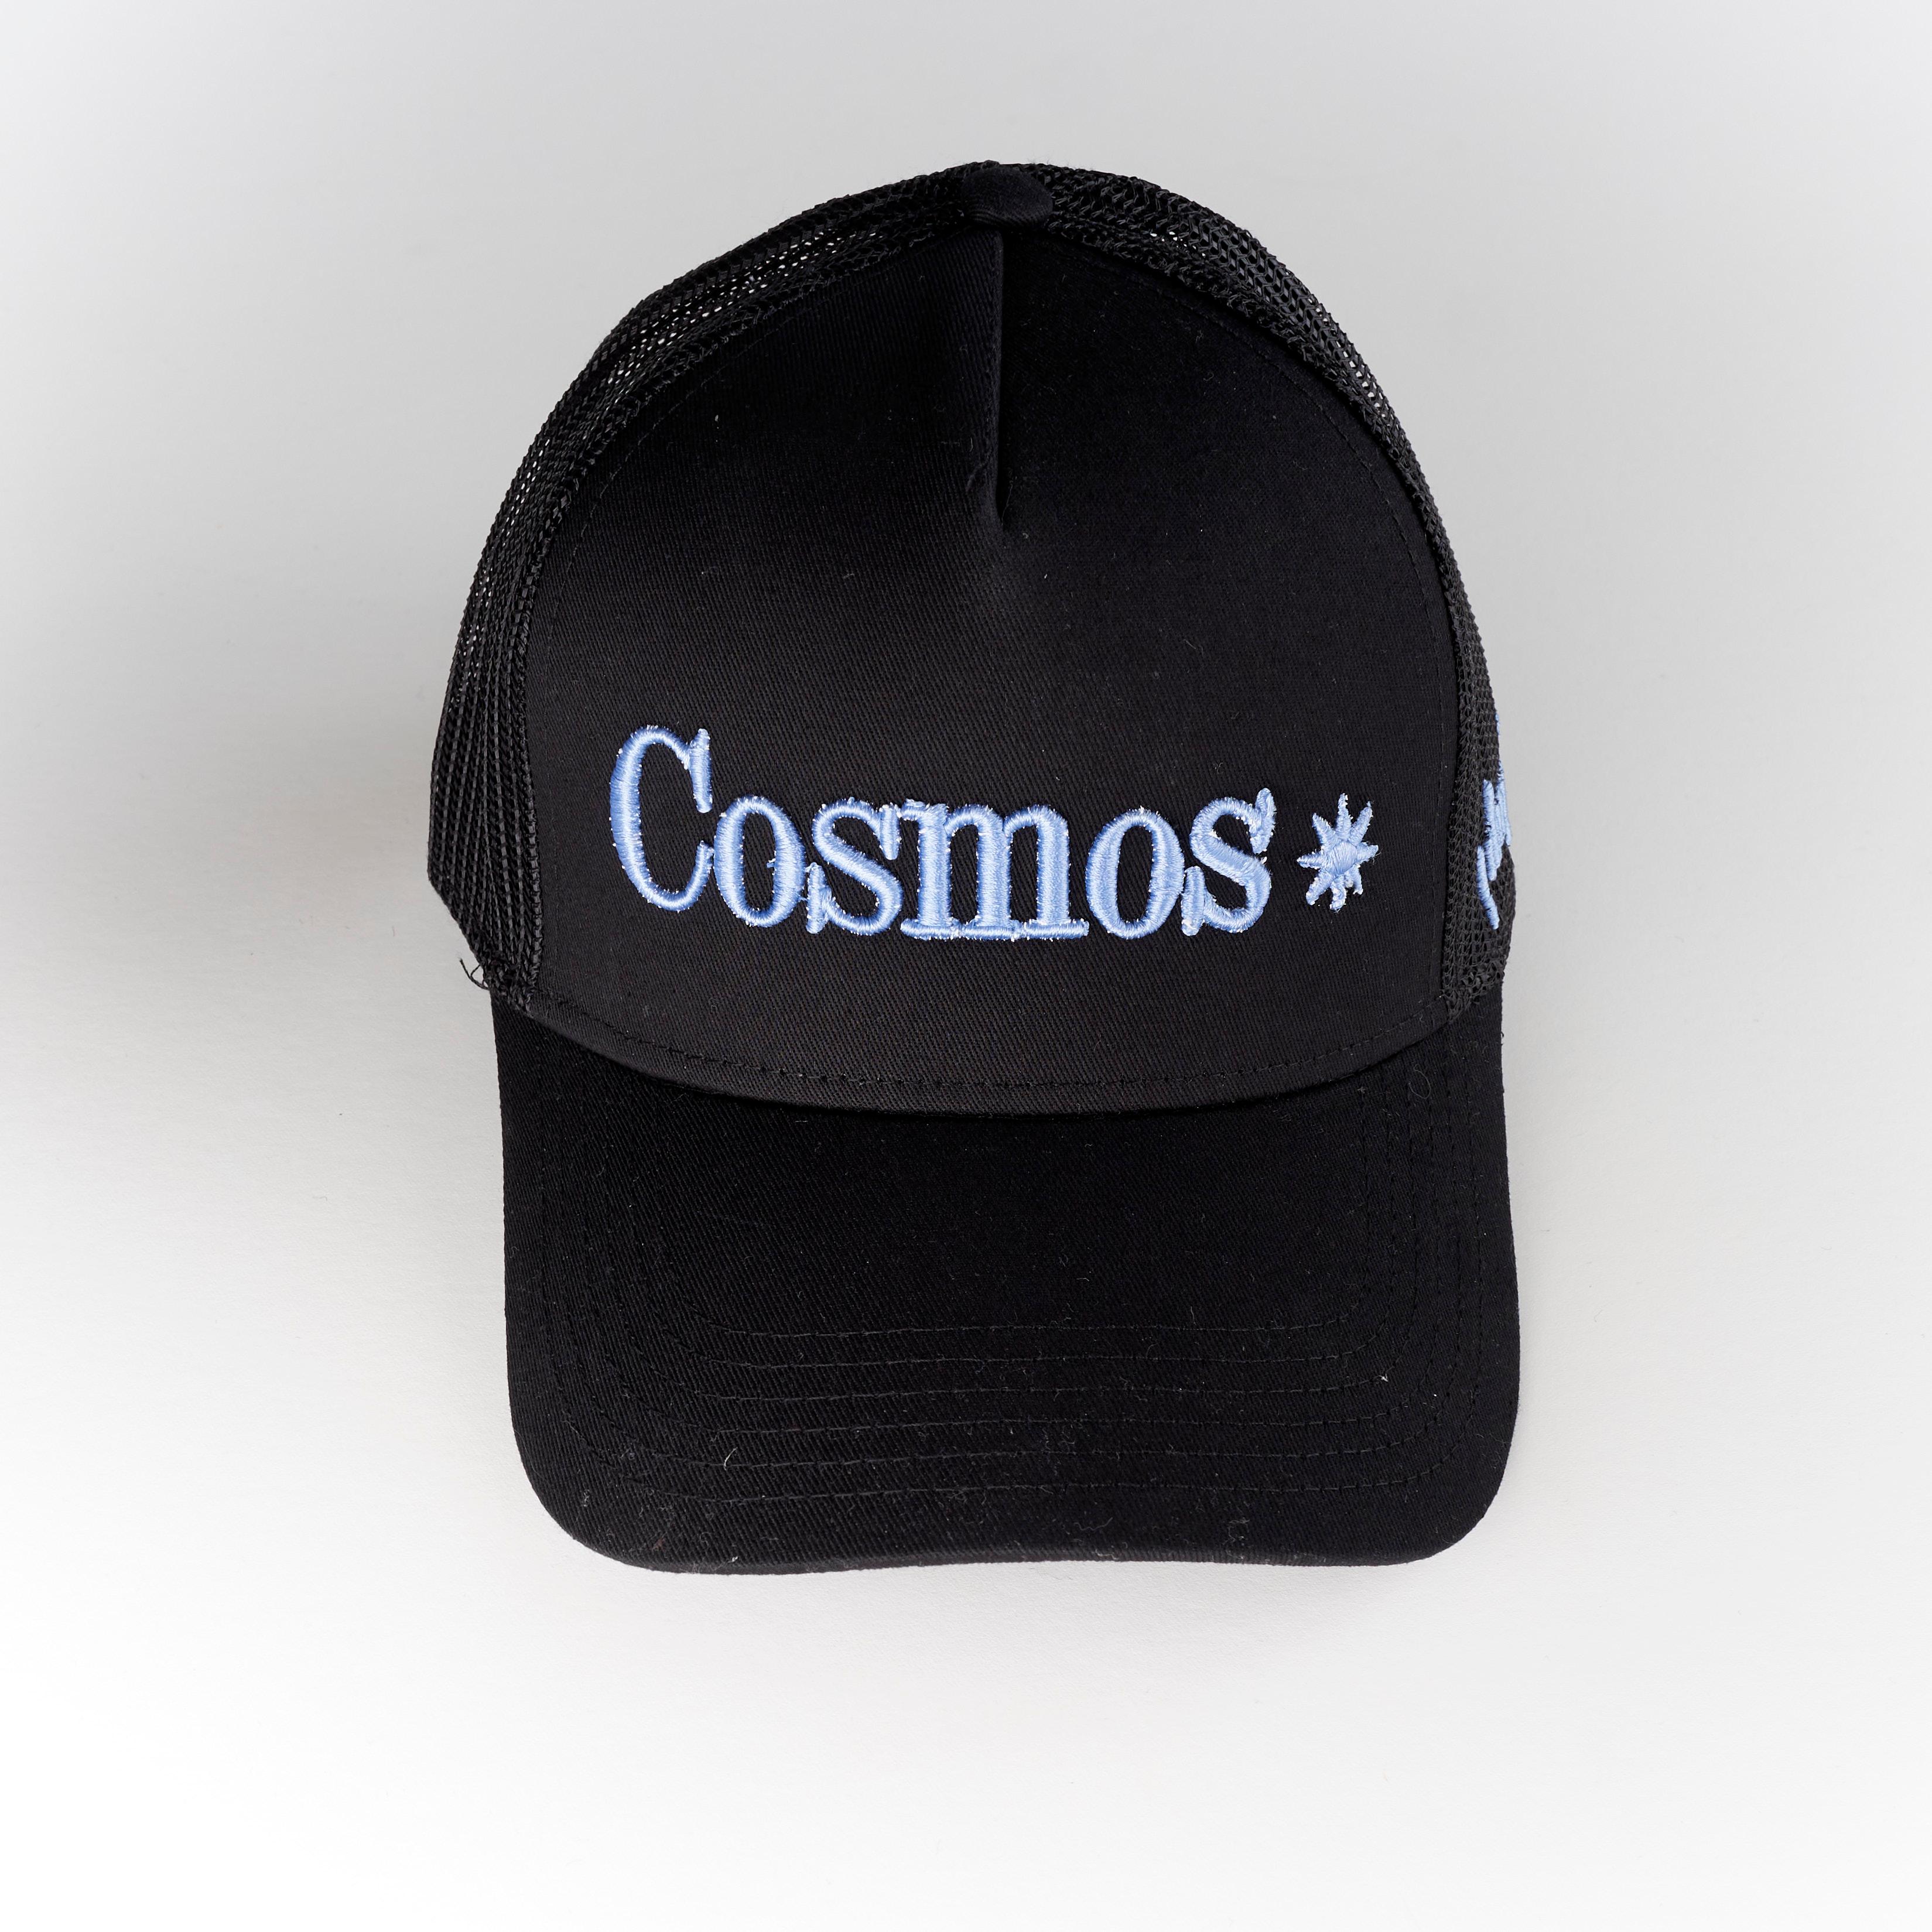 Brand: J Dauphin
Black Cosmos Trucker Hat Light Blue Text

J Dauphin was created 2006 by Swedish French Johanna Dauphin. She started her career working for LVMH owned Fend at the Italian head office in Rome. She later moved to Paris and J Dauphin